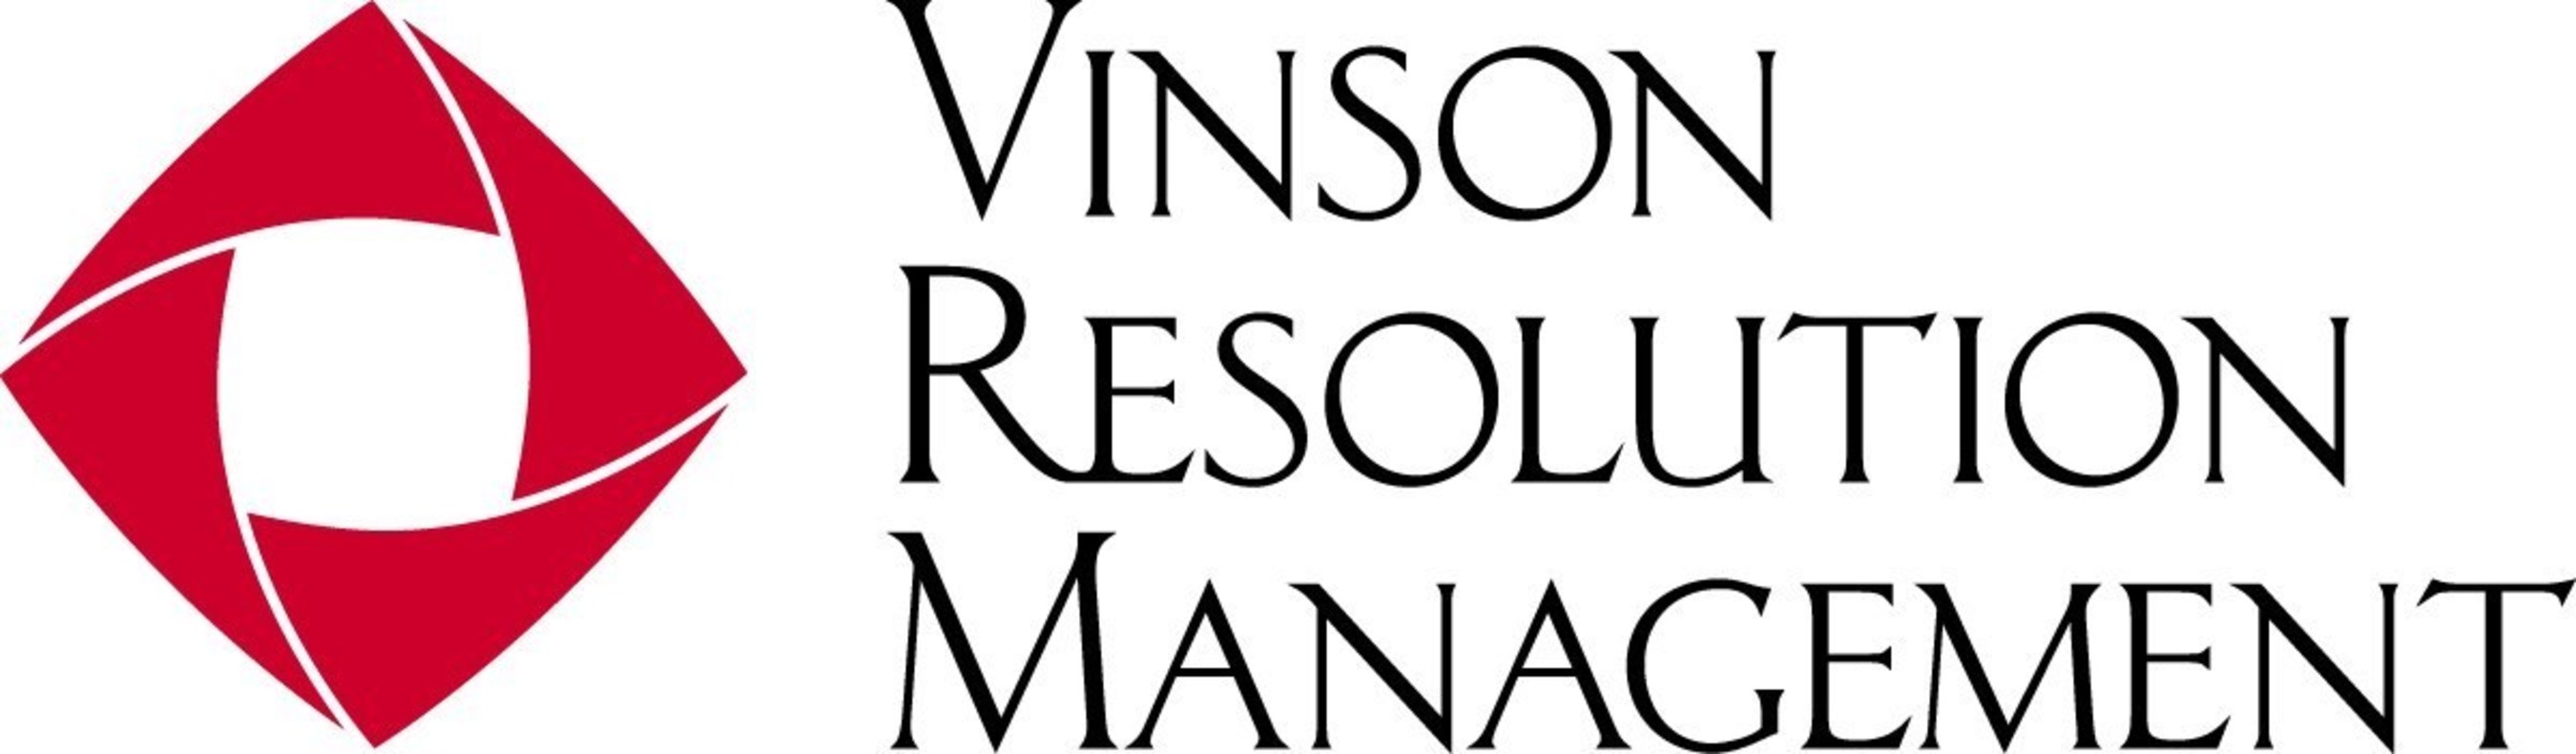 Vinson Resolution Management is a U.S. based financial services firm providing capital for the funding of meritorious commercial litigation.